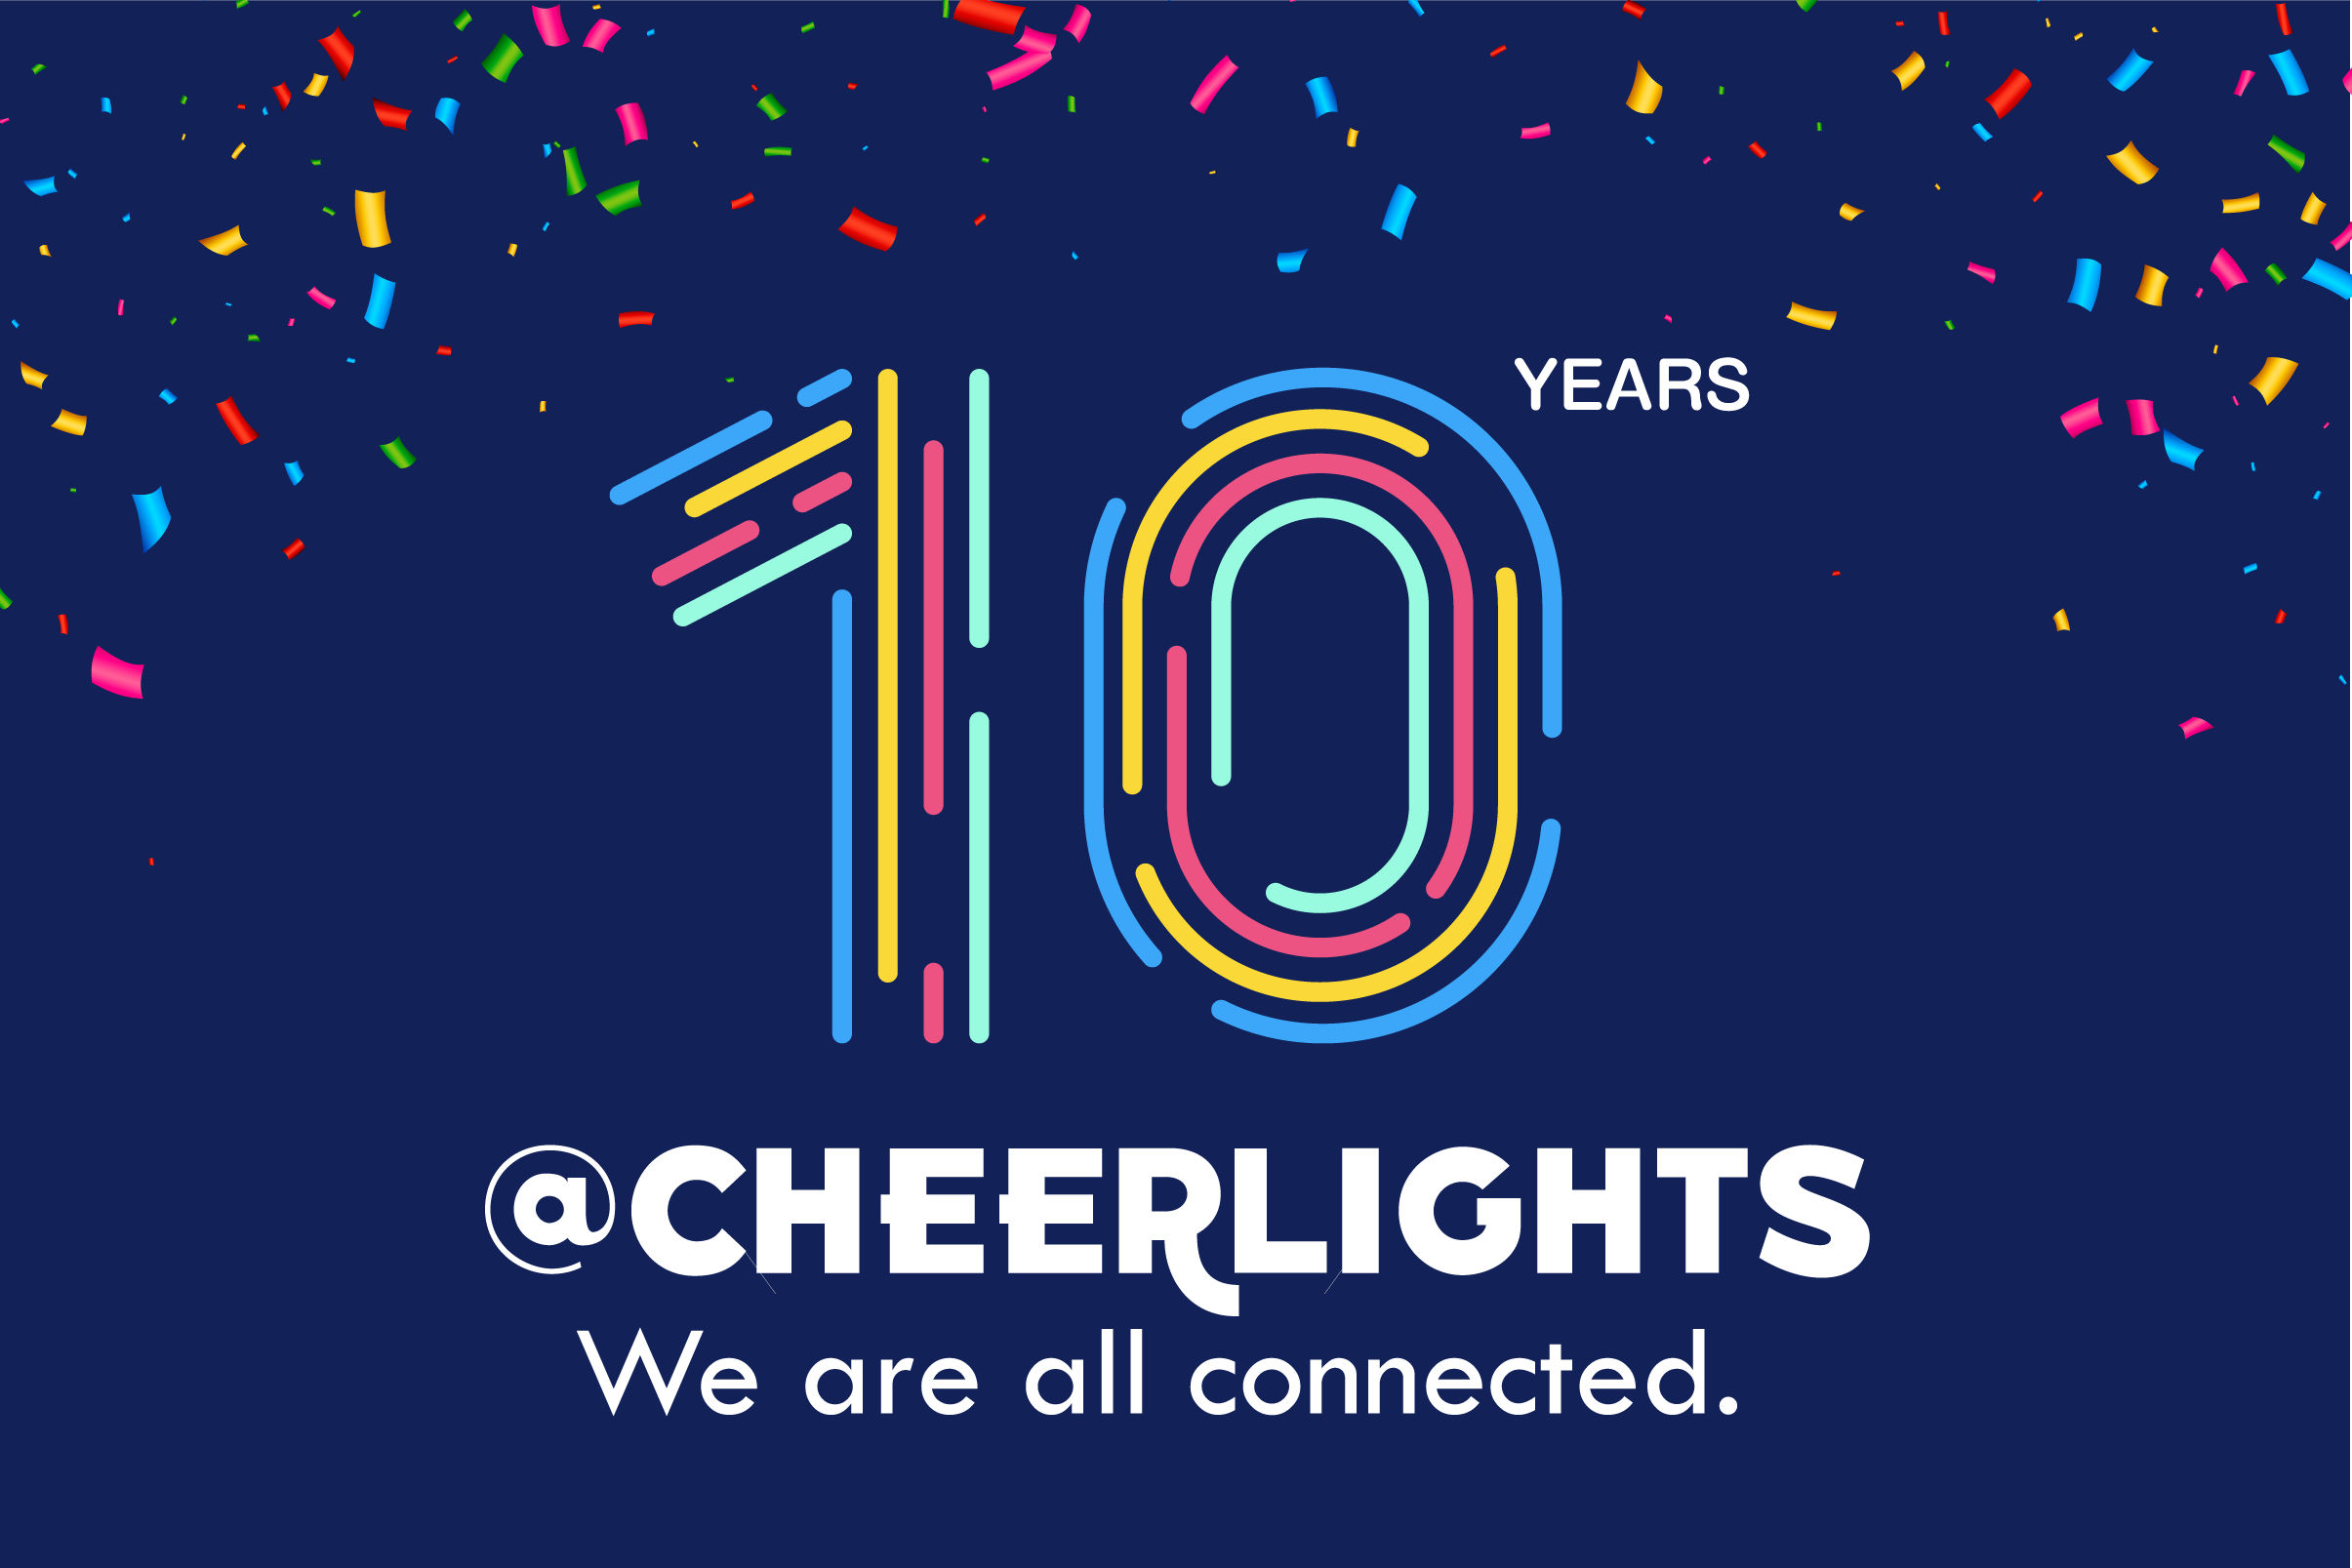 Global Network of Synchronized Lights: CheerLights 10th Anniversary